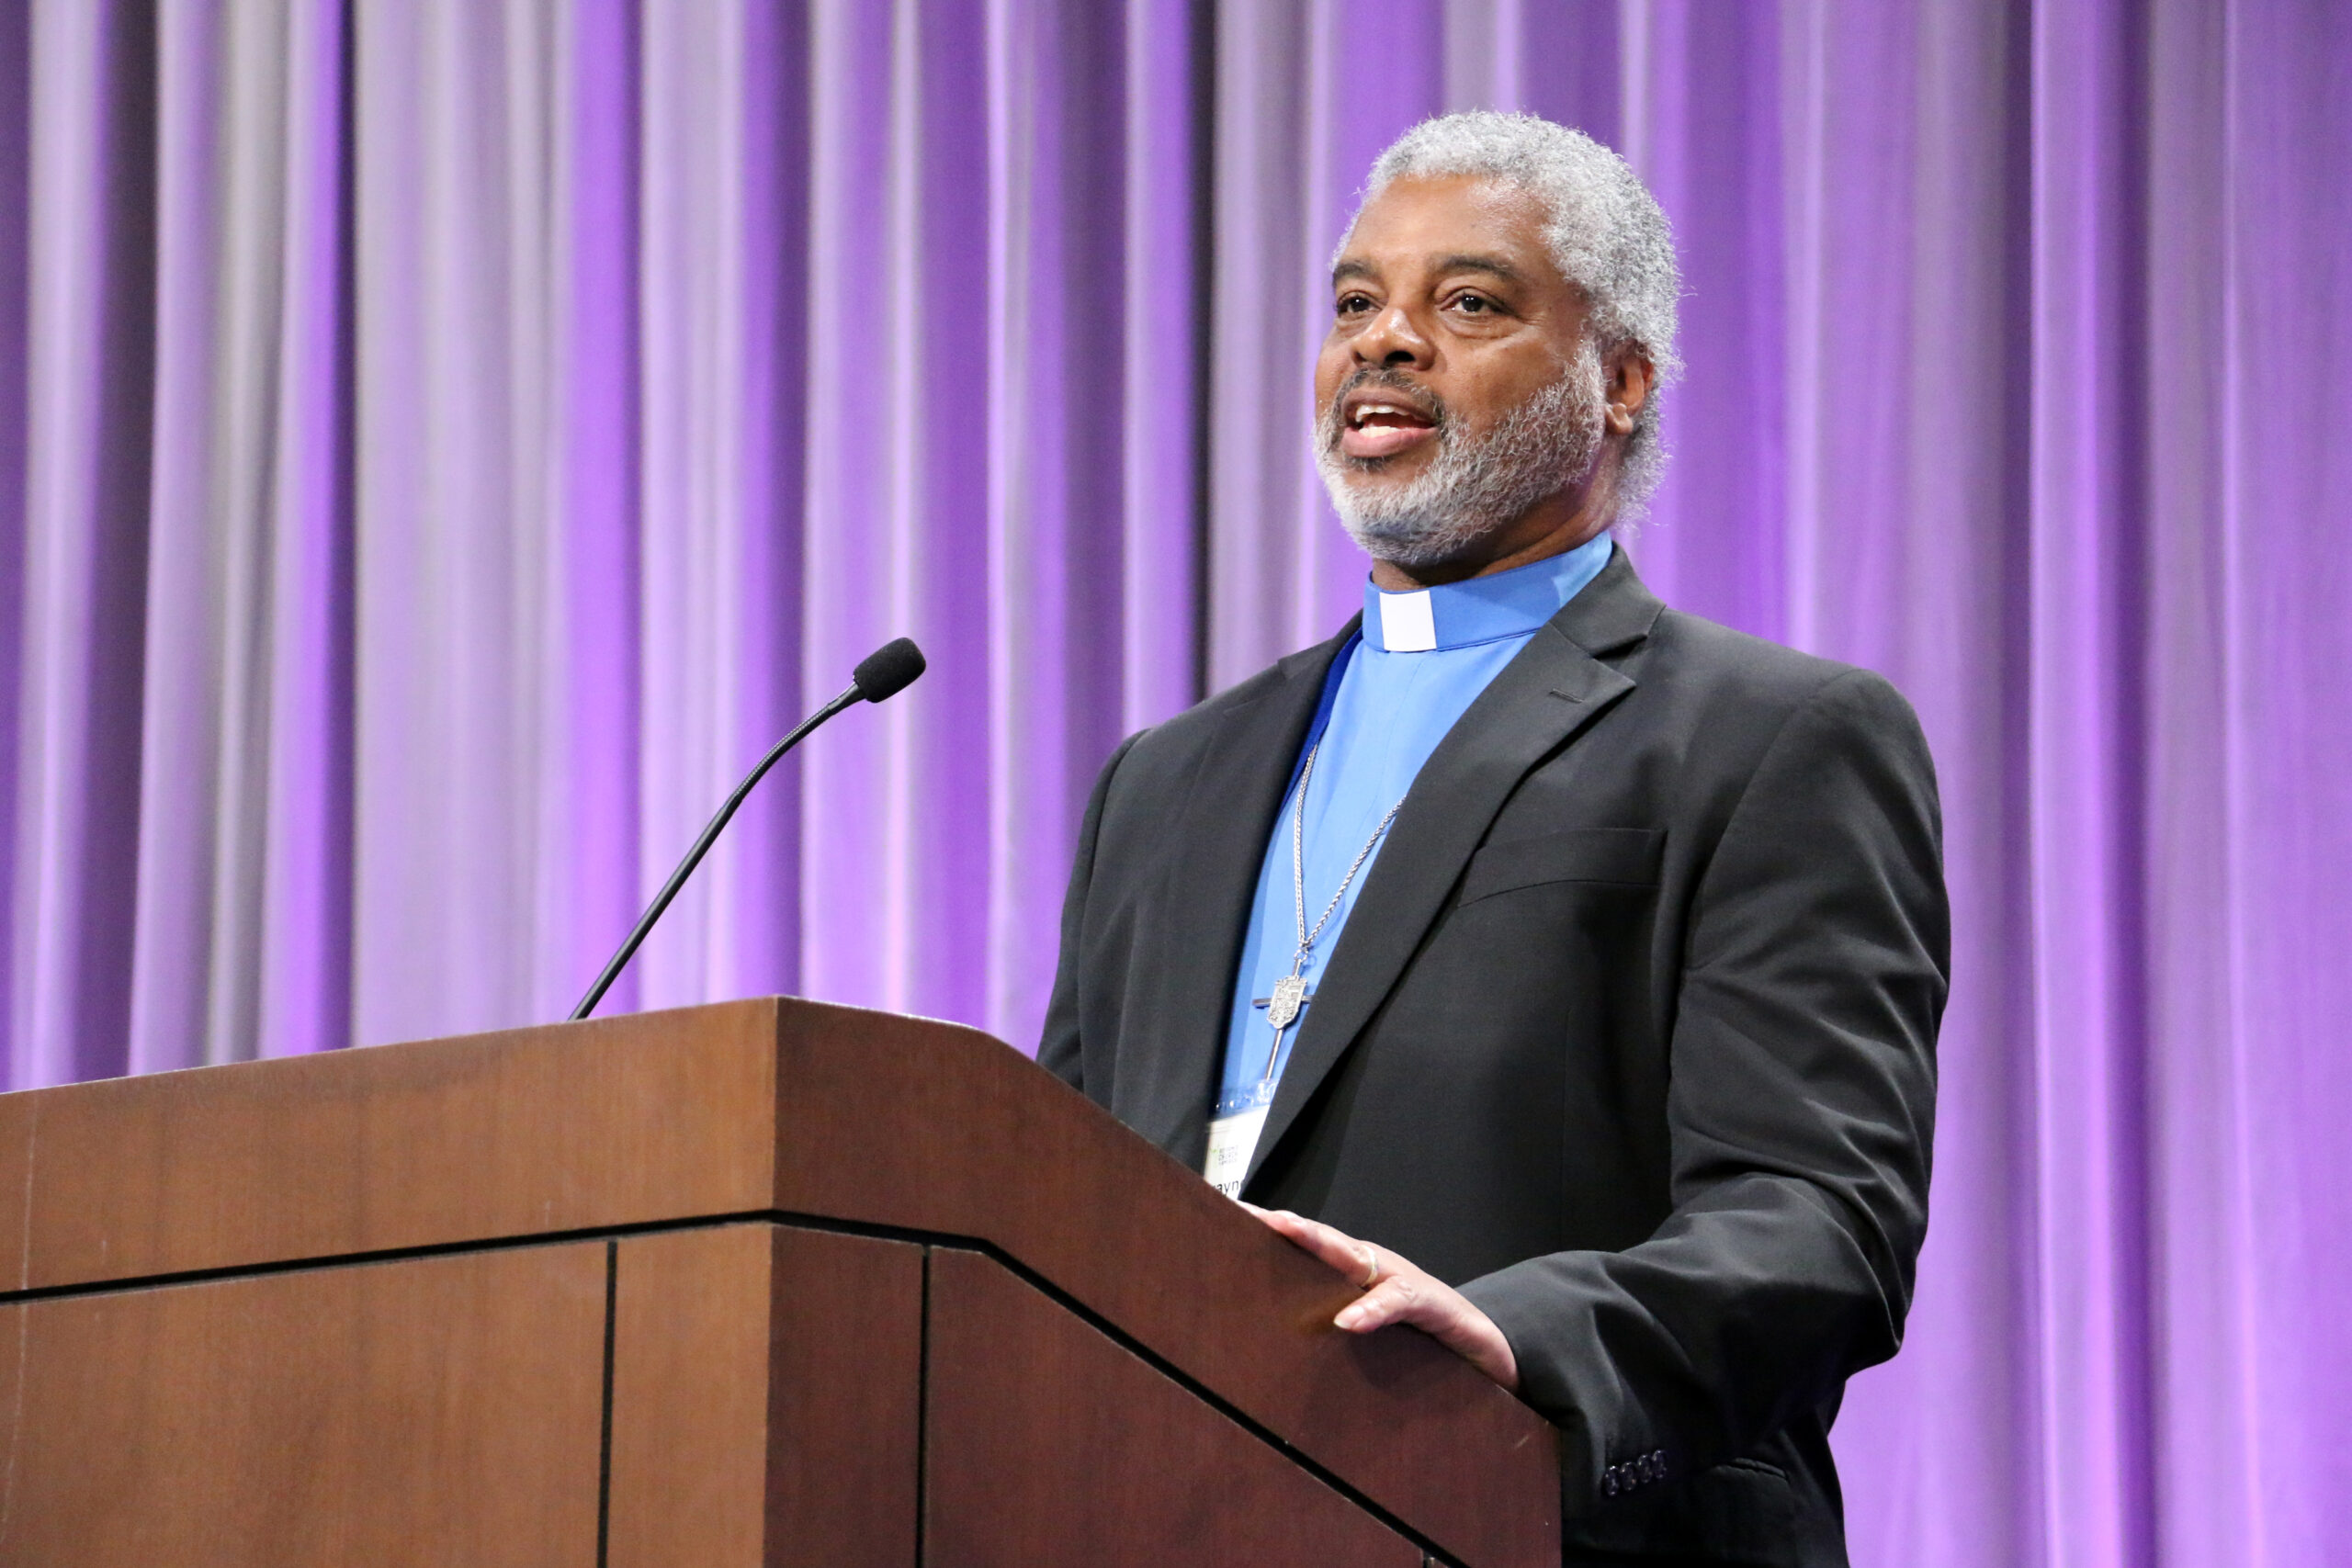 General Synod President Encourages Mission Trips, Shared Stories, and Prayer